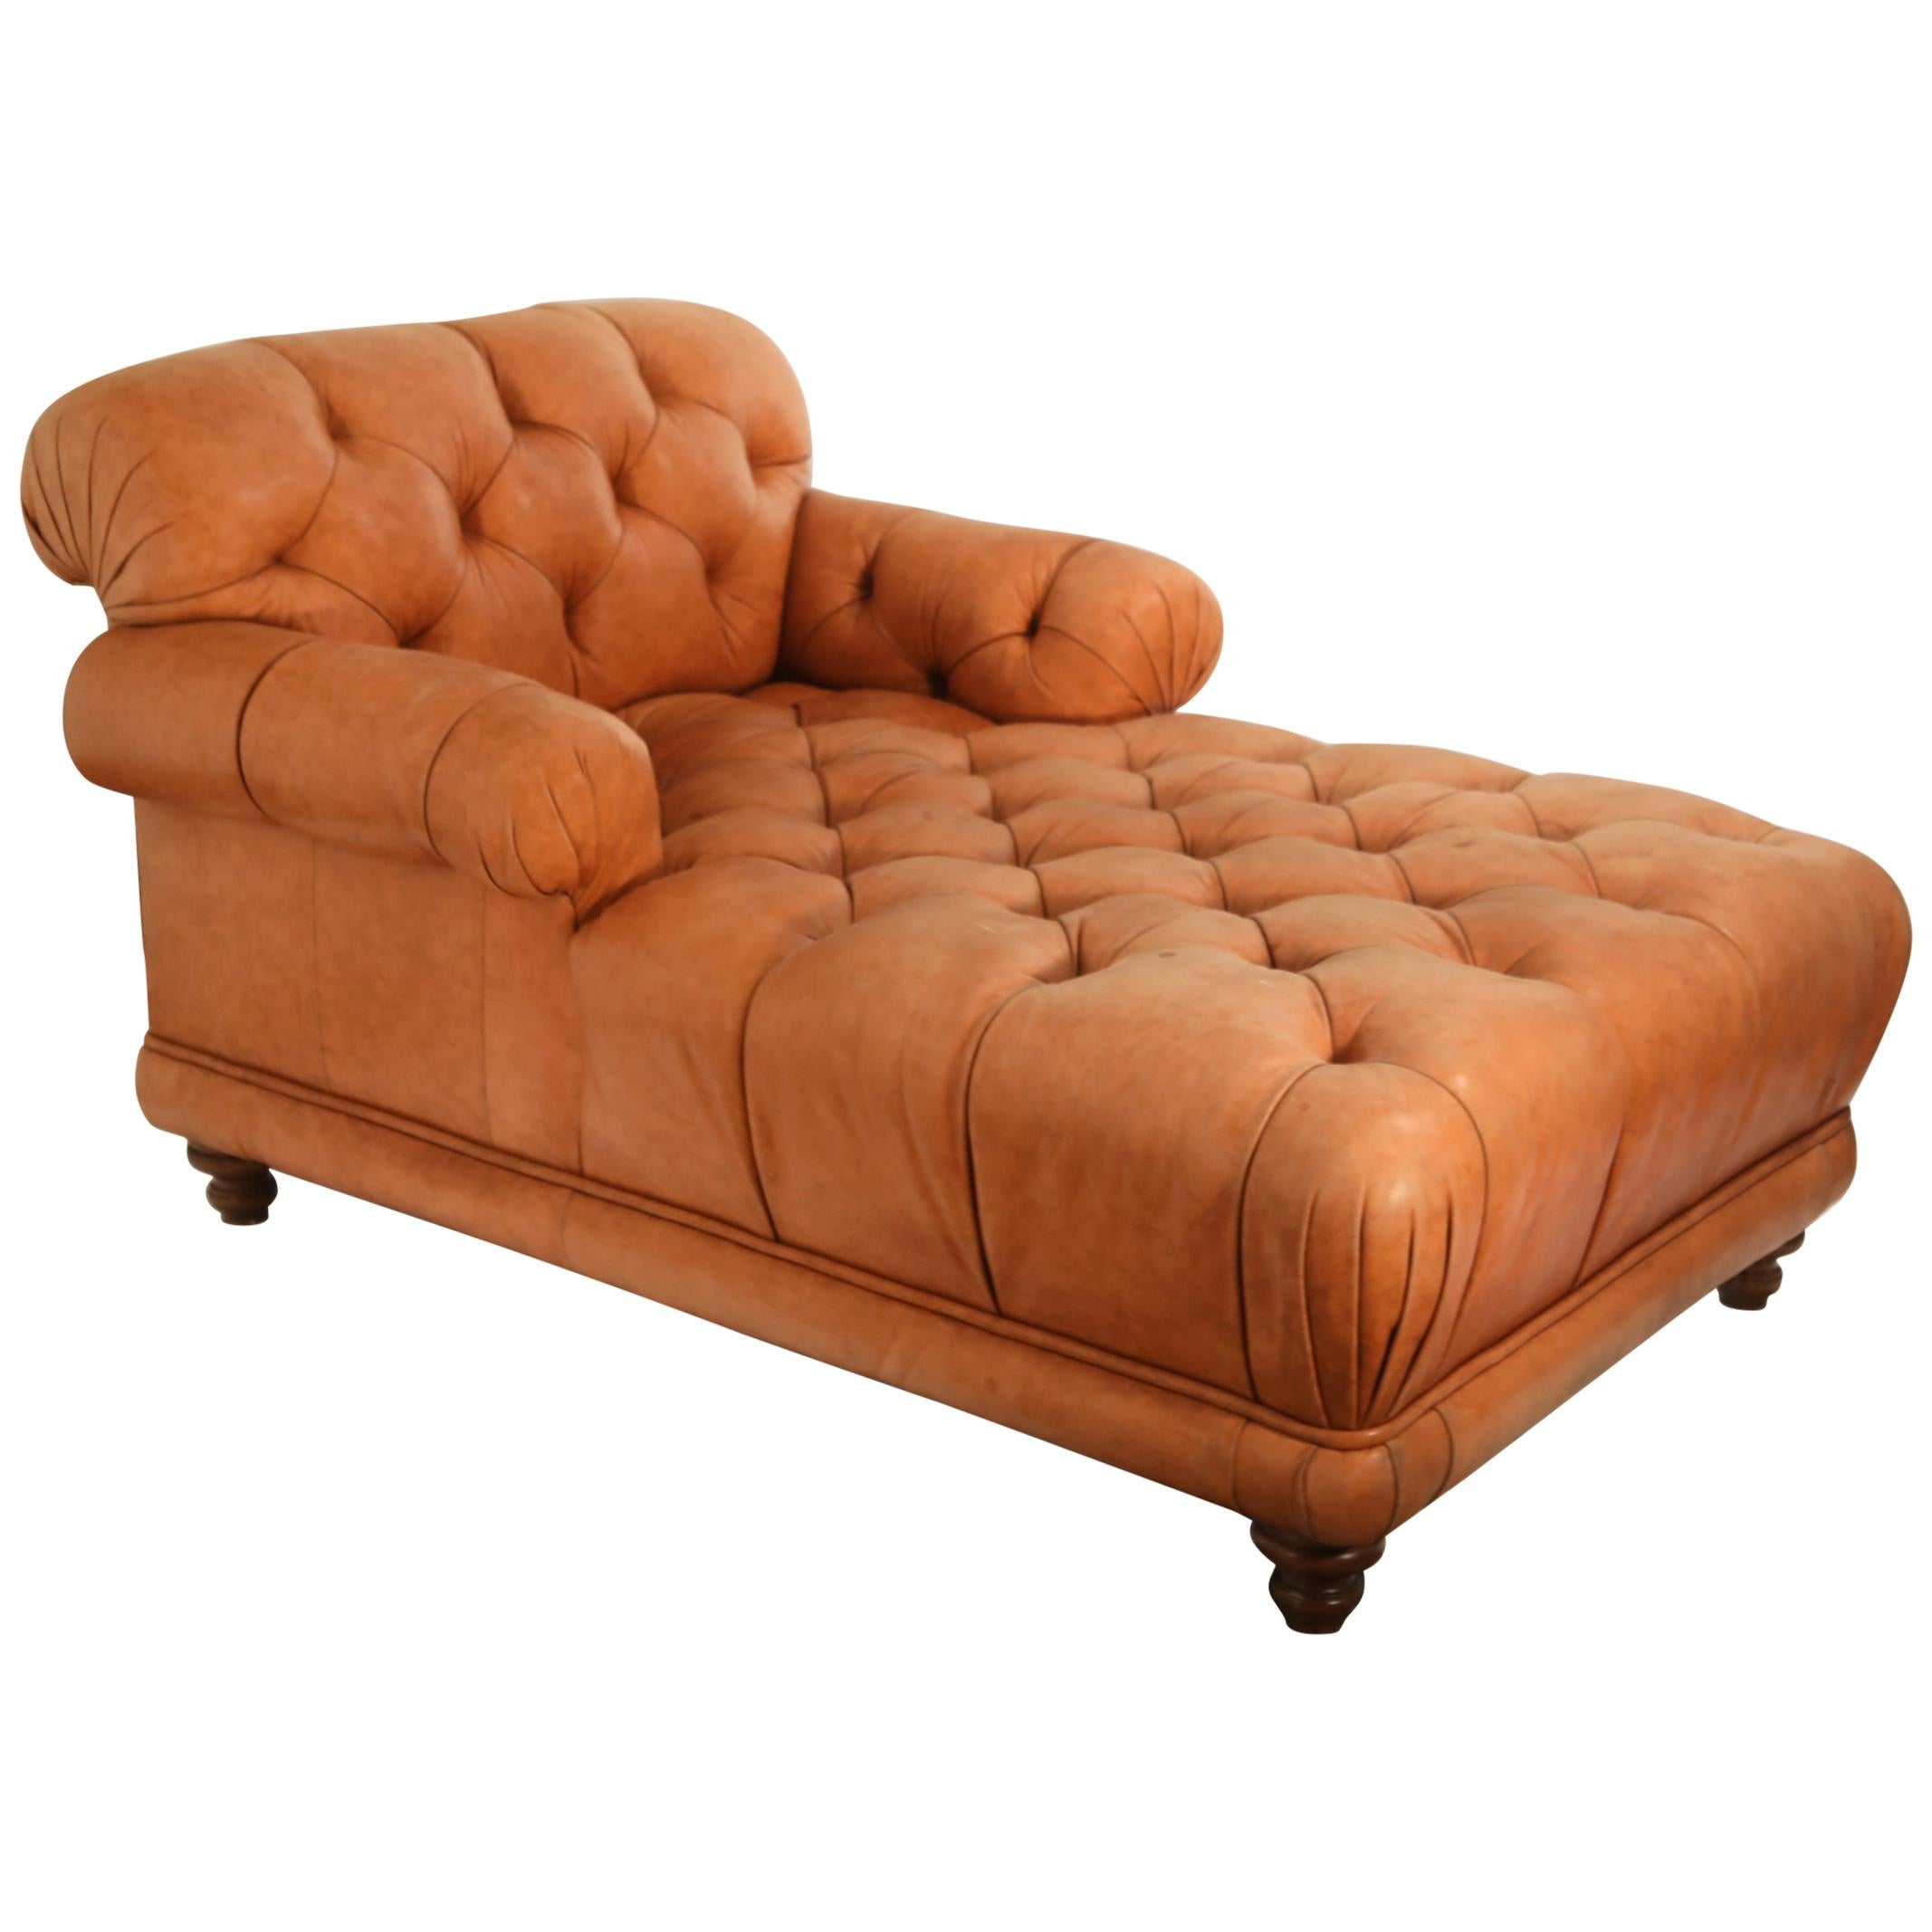 Tufted Distressed Leather Ralph Lauren Chesterfield Styled Chaise Lounge Daybed